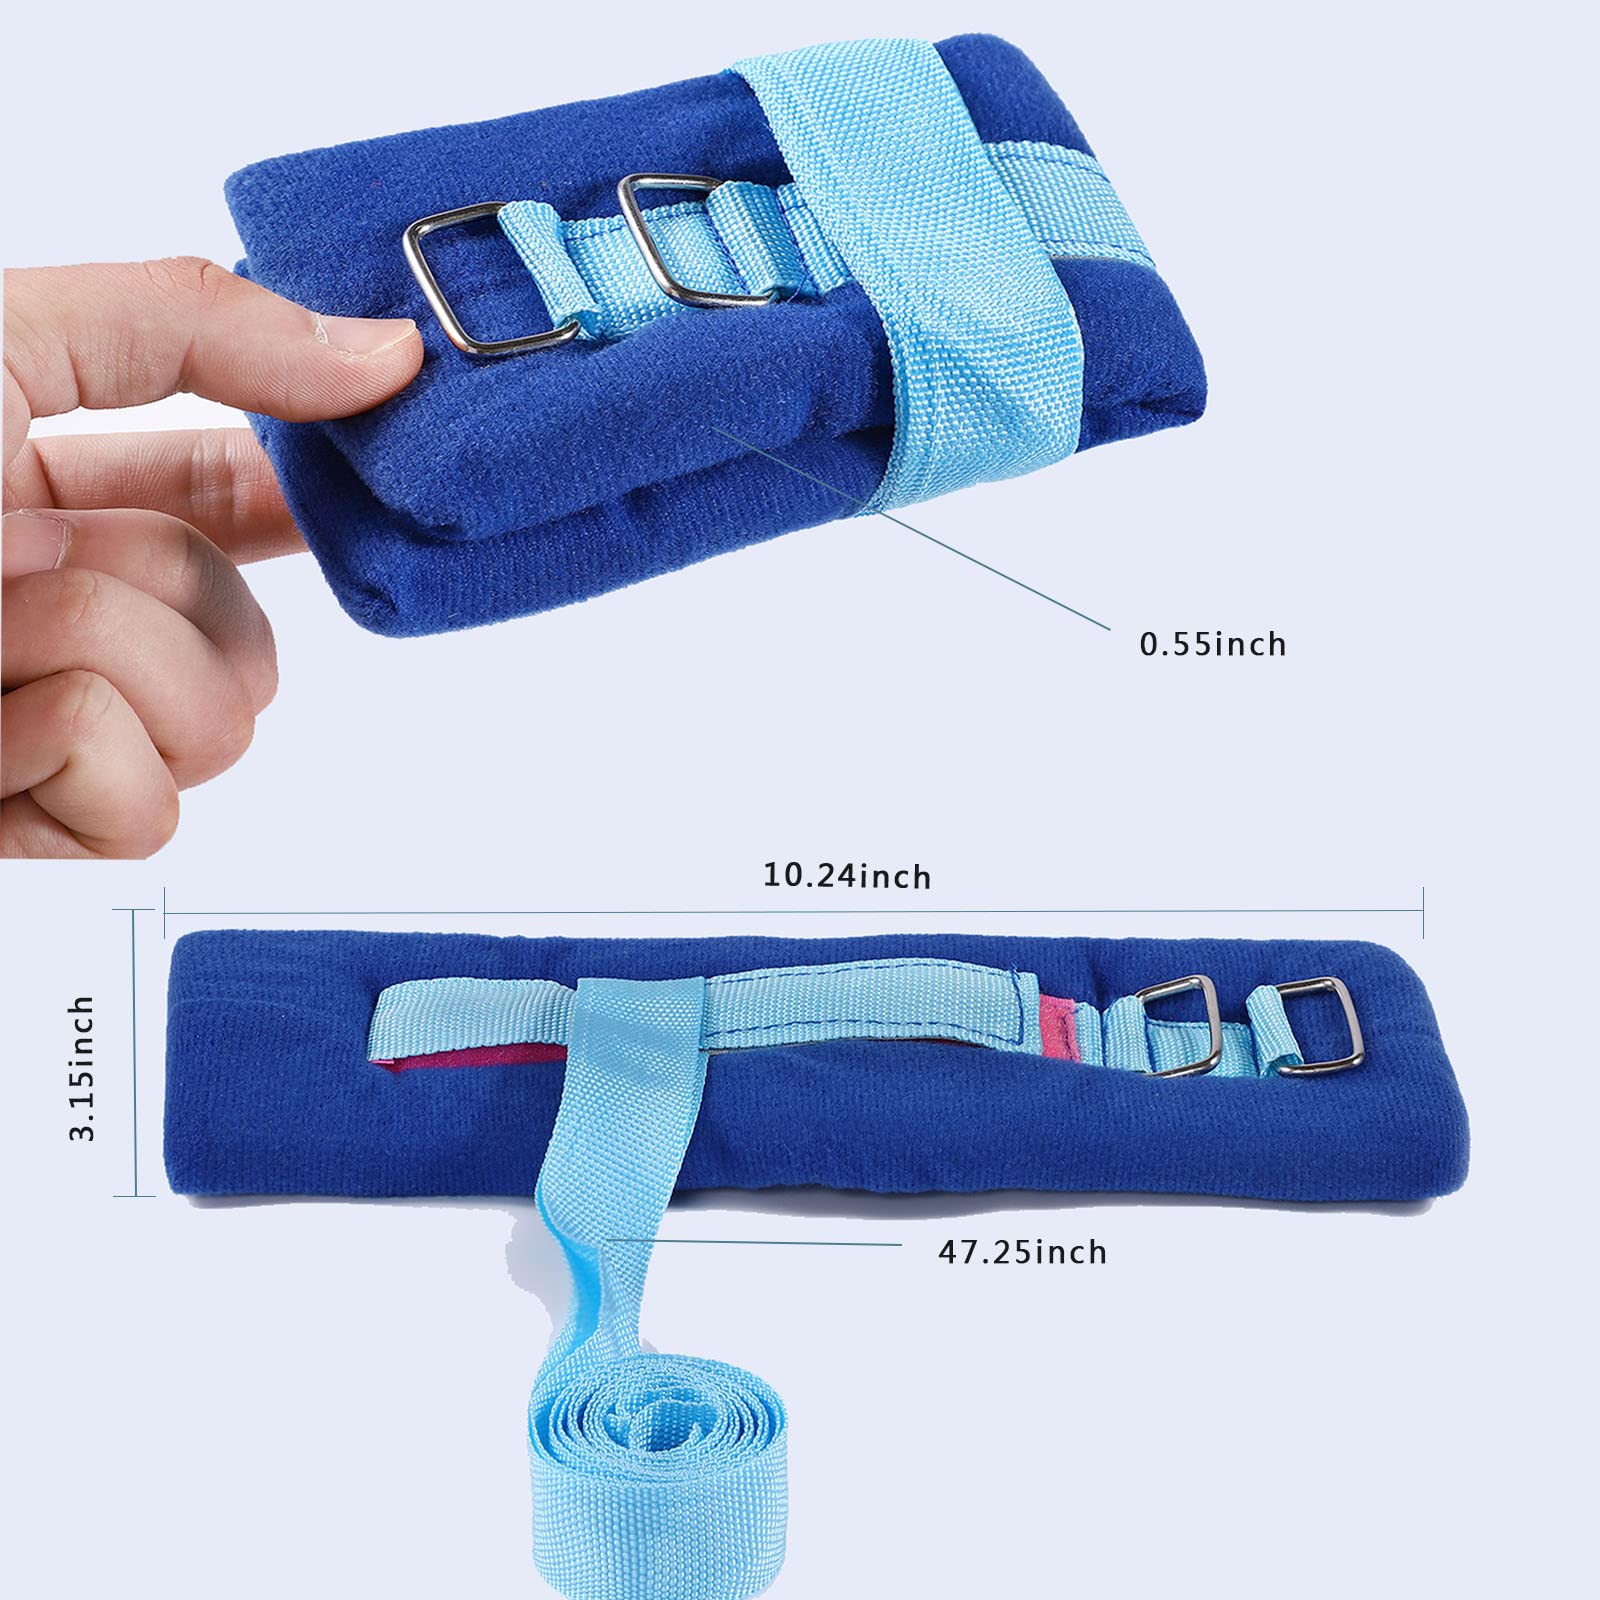 4PCS Medical Bondaged Restraints Hospital Bed Wrist Strap Patient Ankle Straps for Bed Safety Rails Limb Holders Fixed Belt Anti-Grasping Harness Hand Strap Anti-Extubation Tube Care Products (Blue)